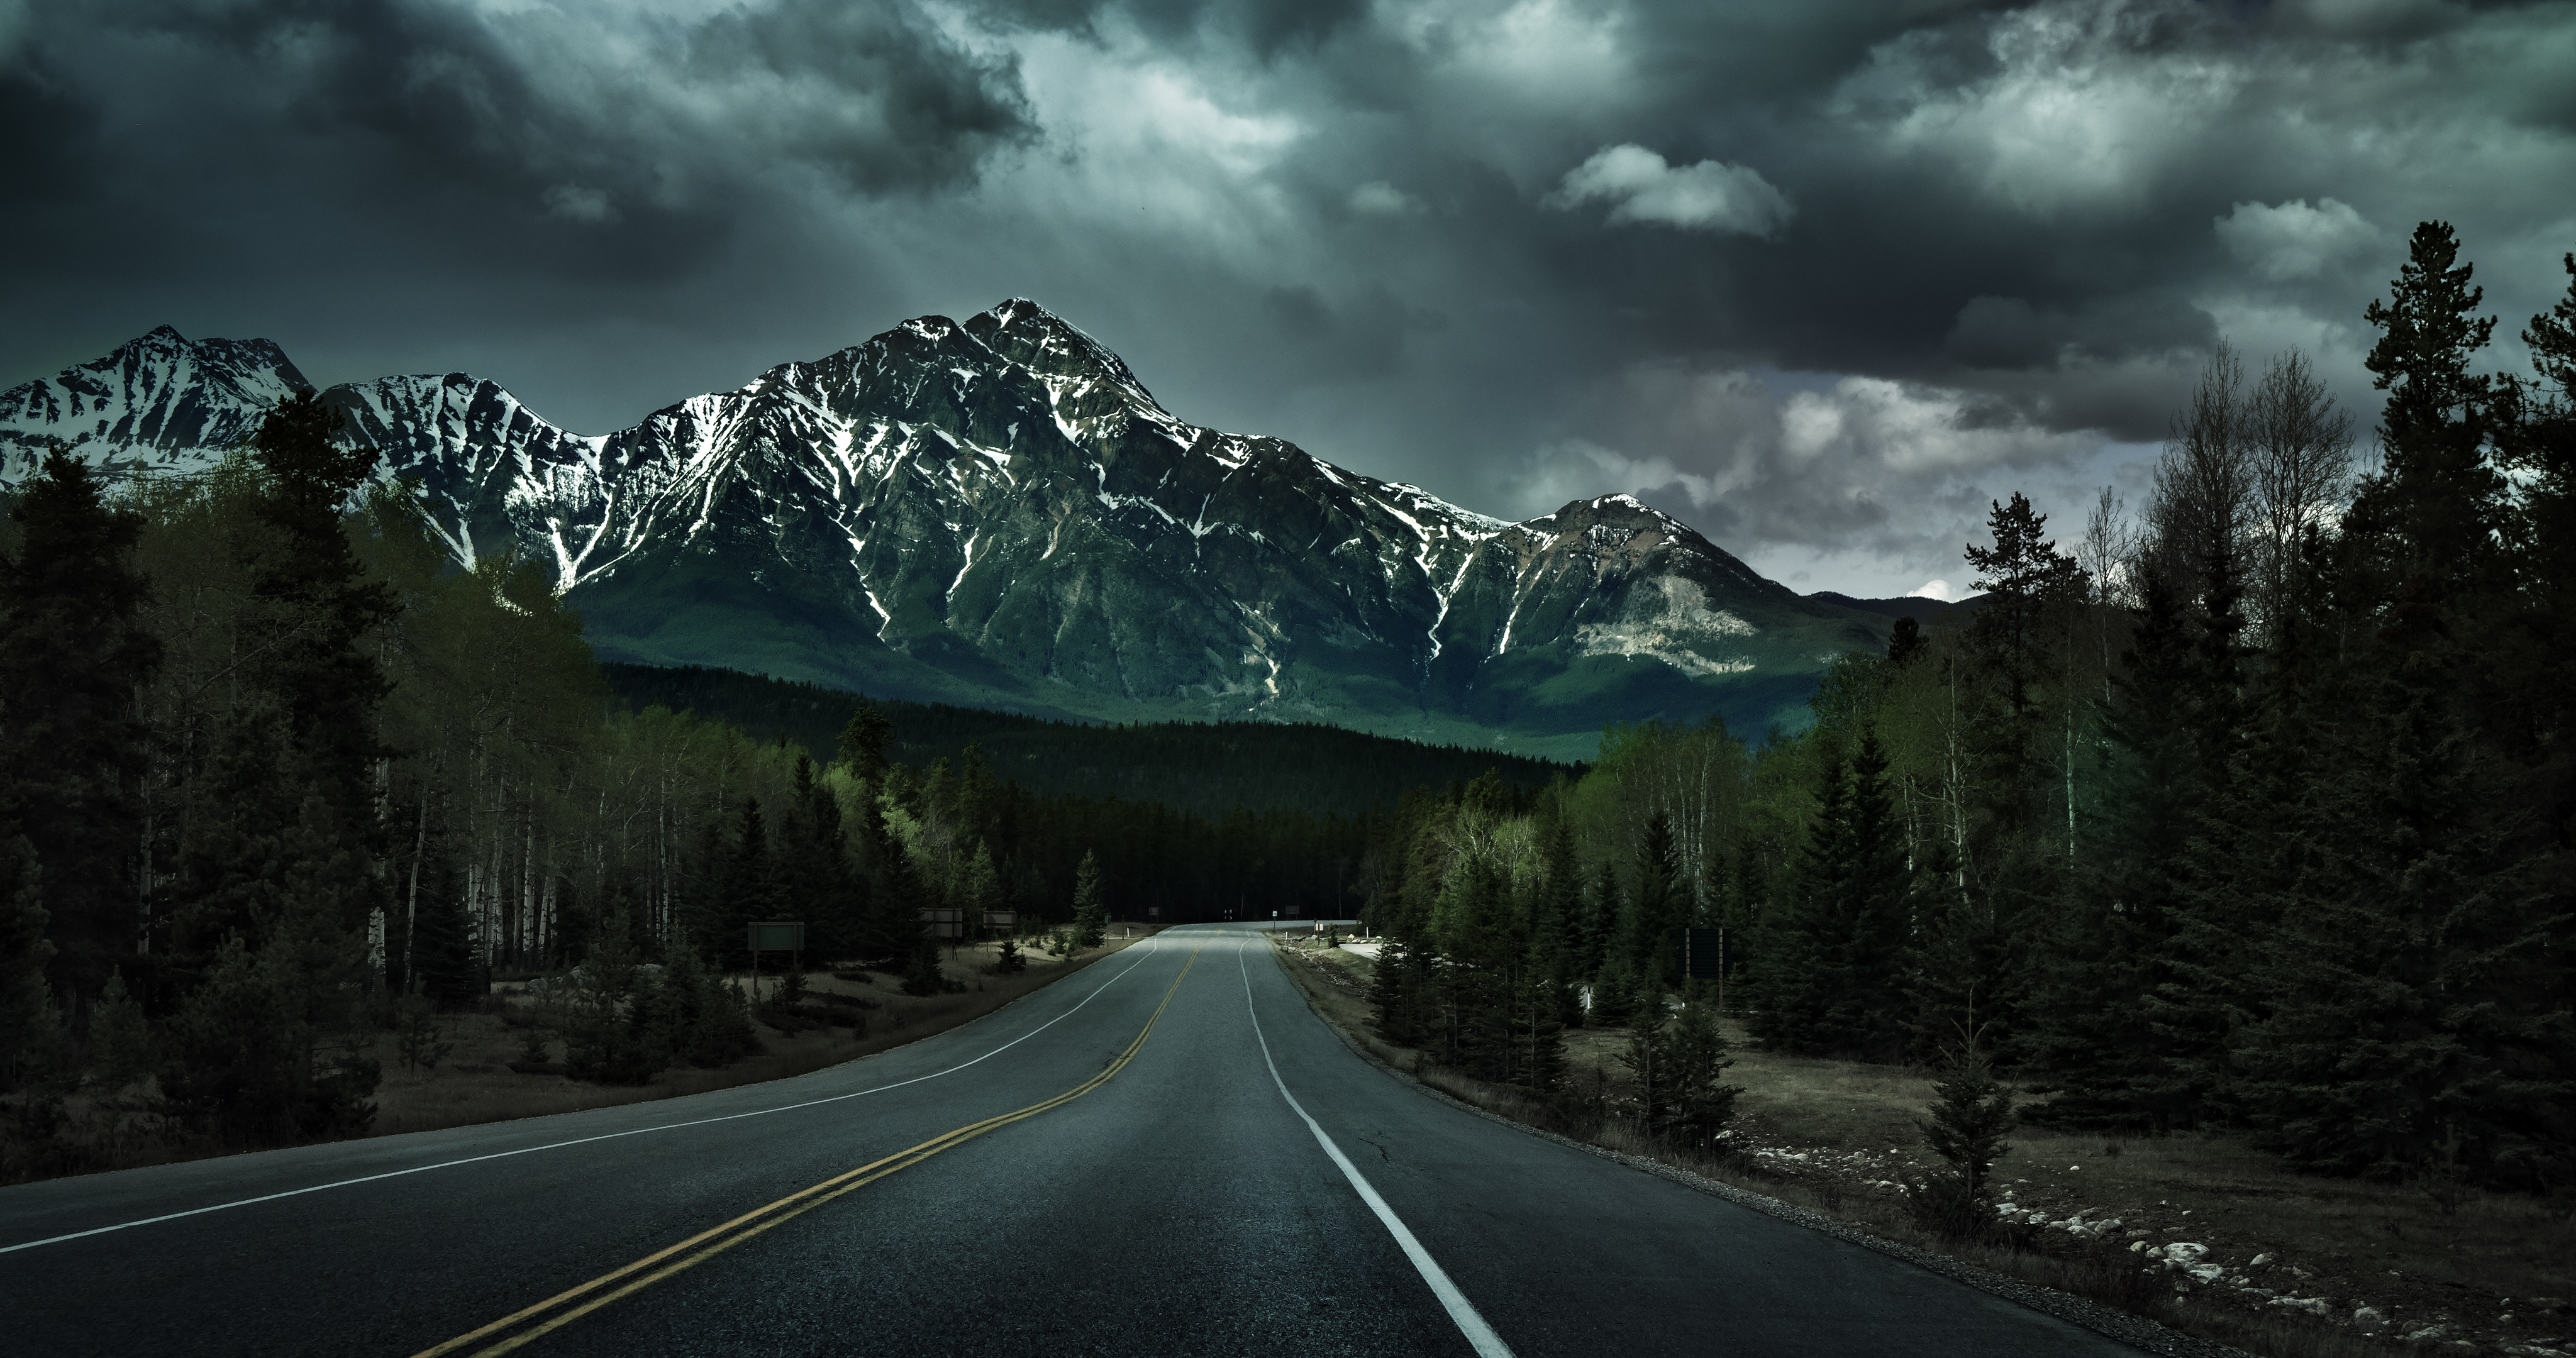 4K Road Wallpapers High Quality Wallpaper Download - High ...